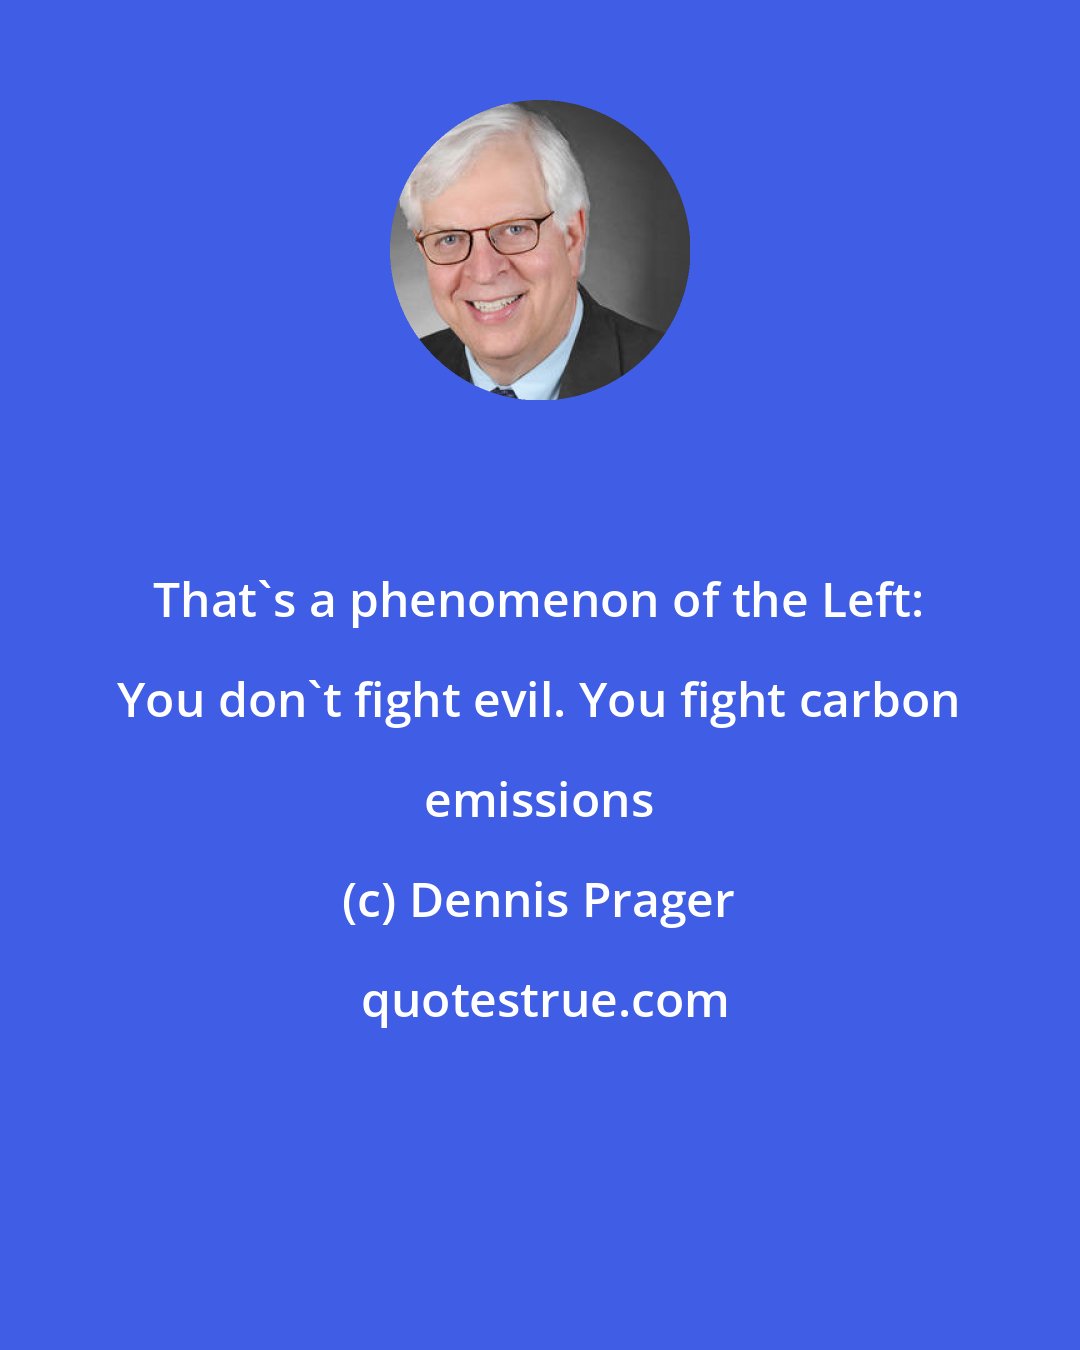 Dennis Prager: That's a phenomenon of the Left: You don't fight evil. You fight carbon emissions